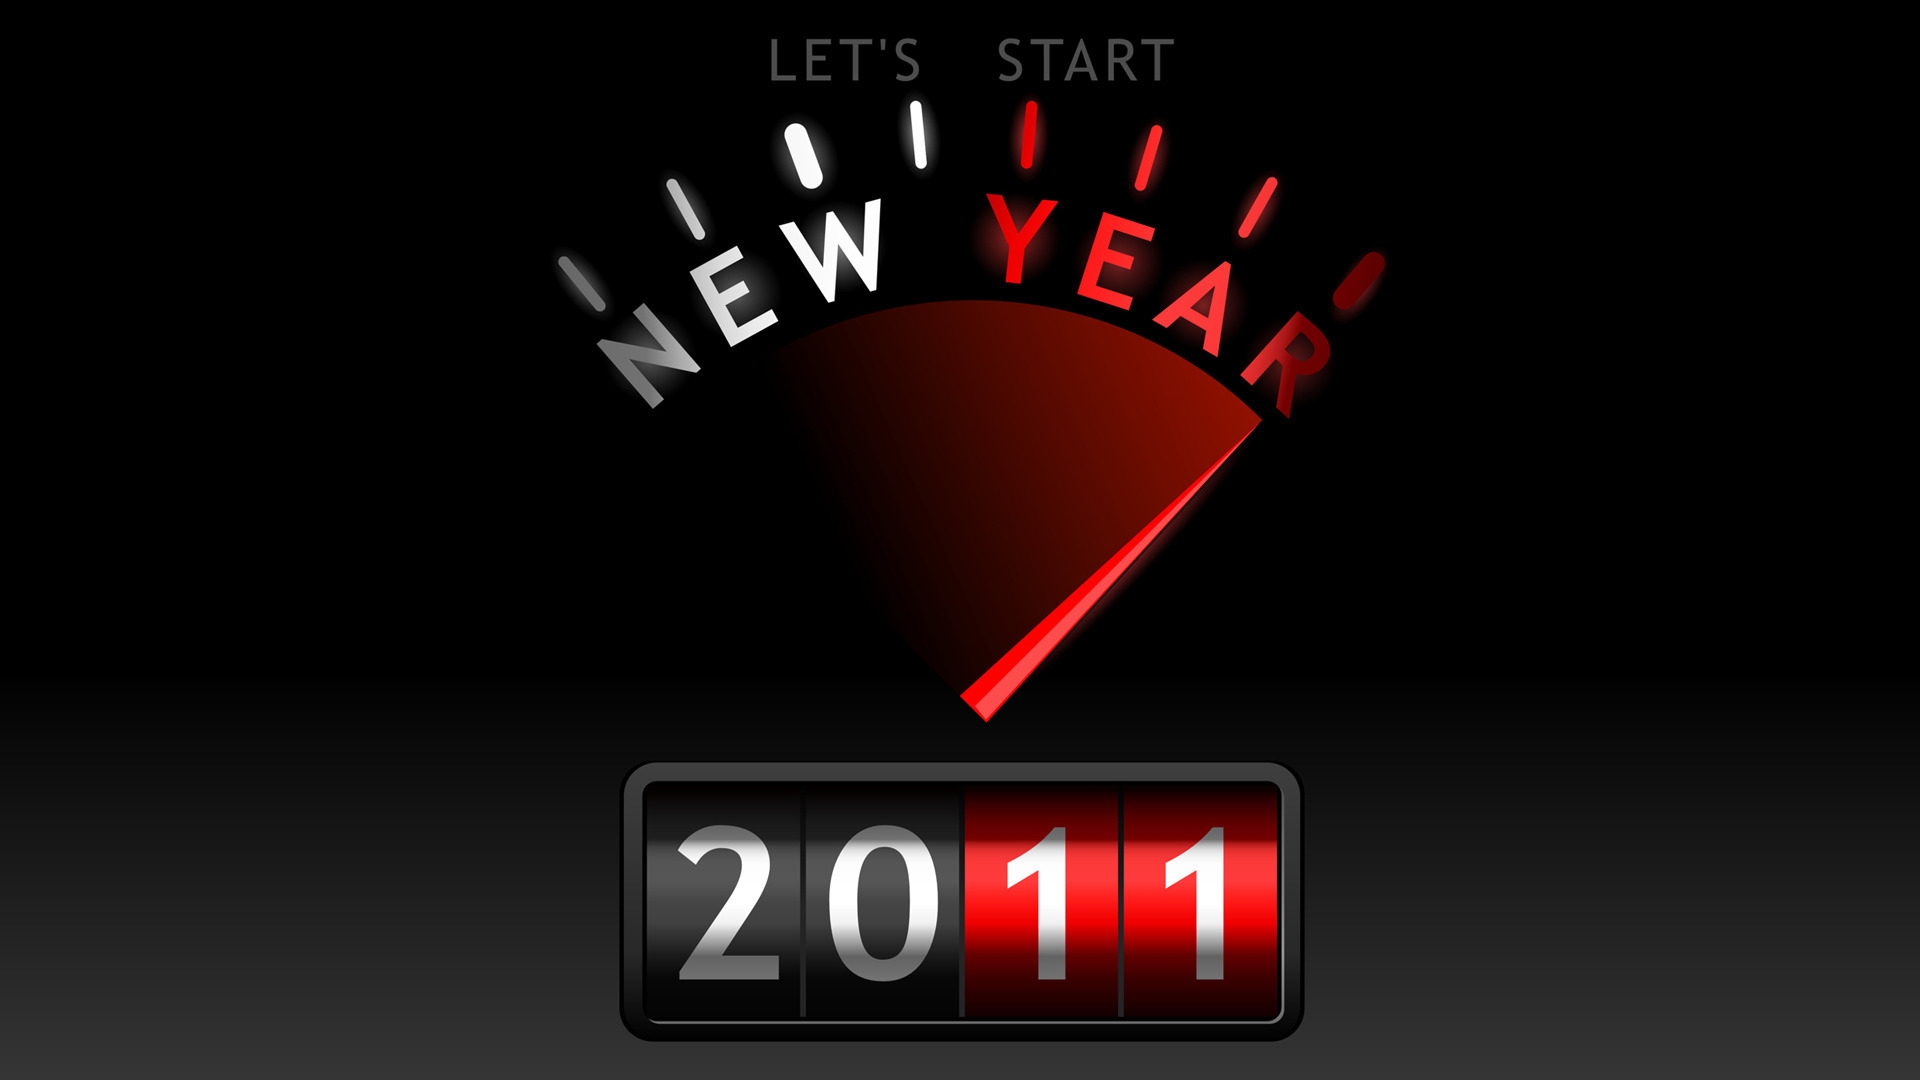 Ready for 2011 for 1920 x 1080 HDTV 1080p resolution